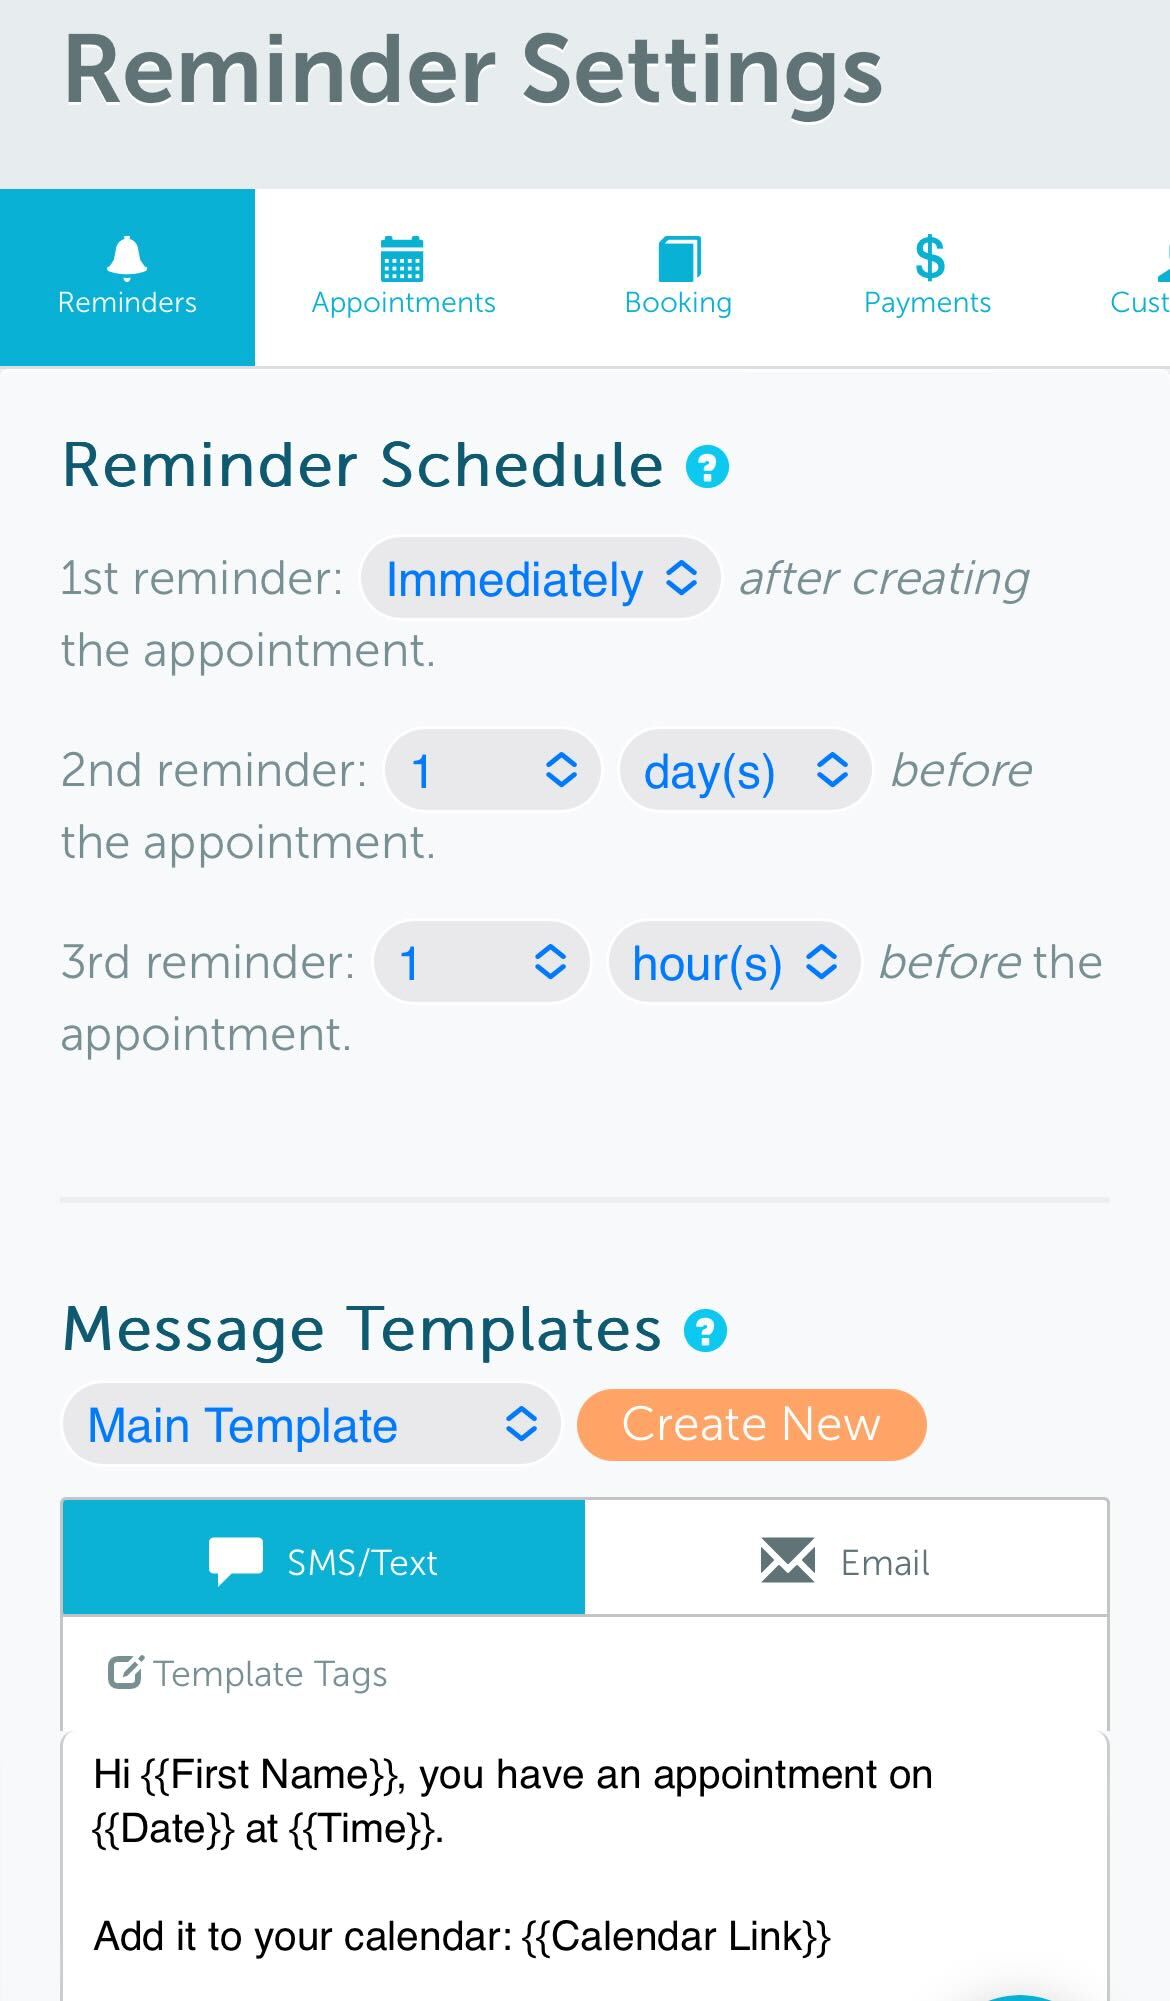 Schedule your reminders and customize your messaging